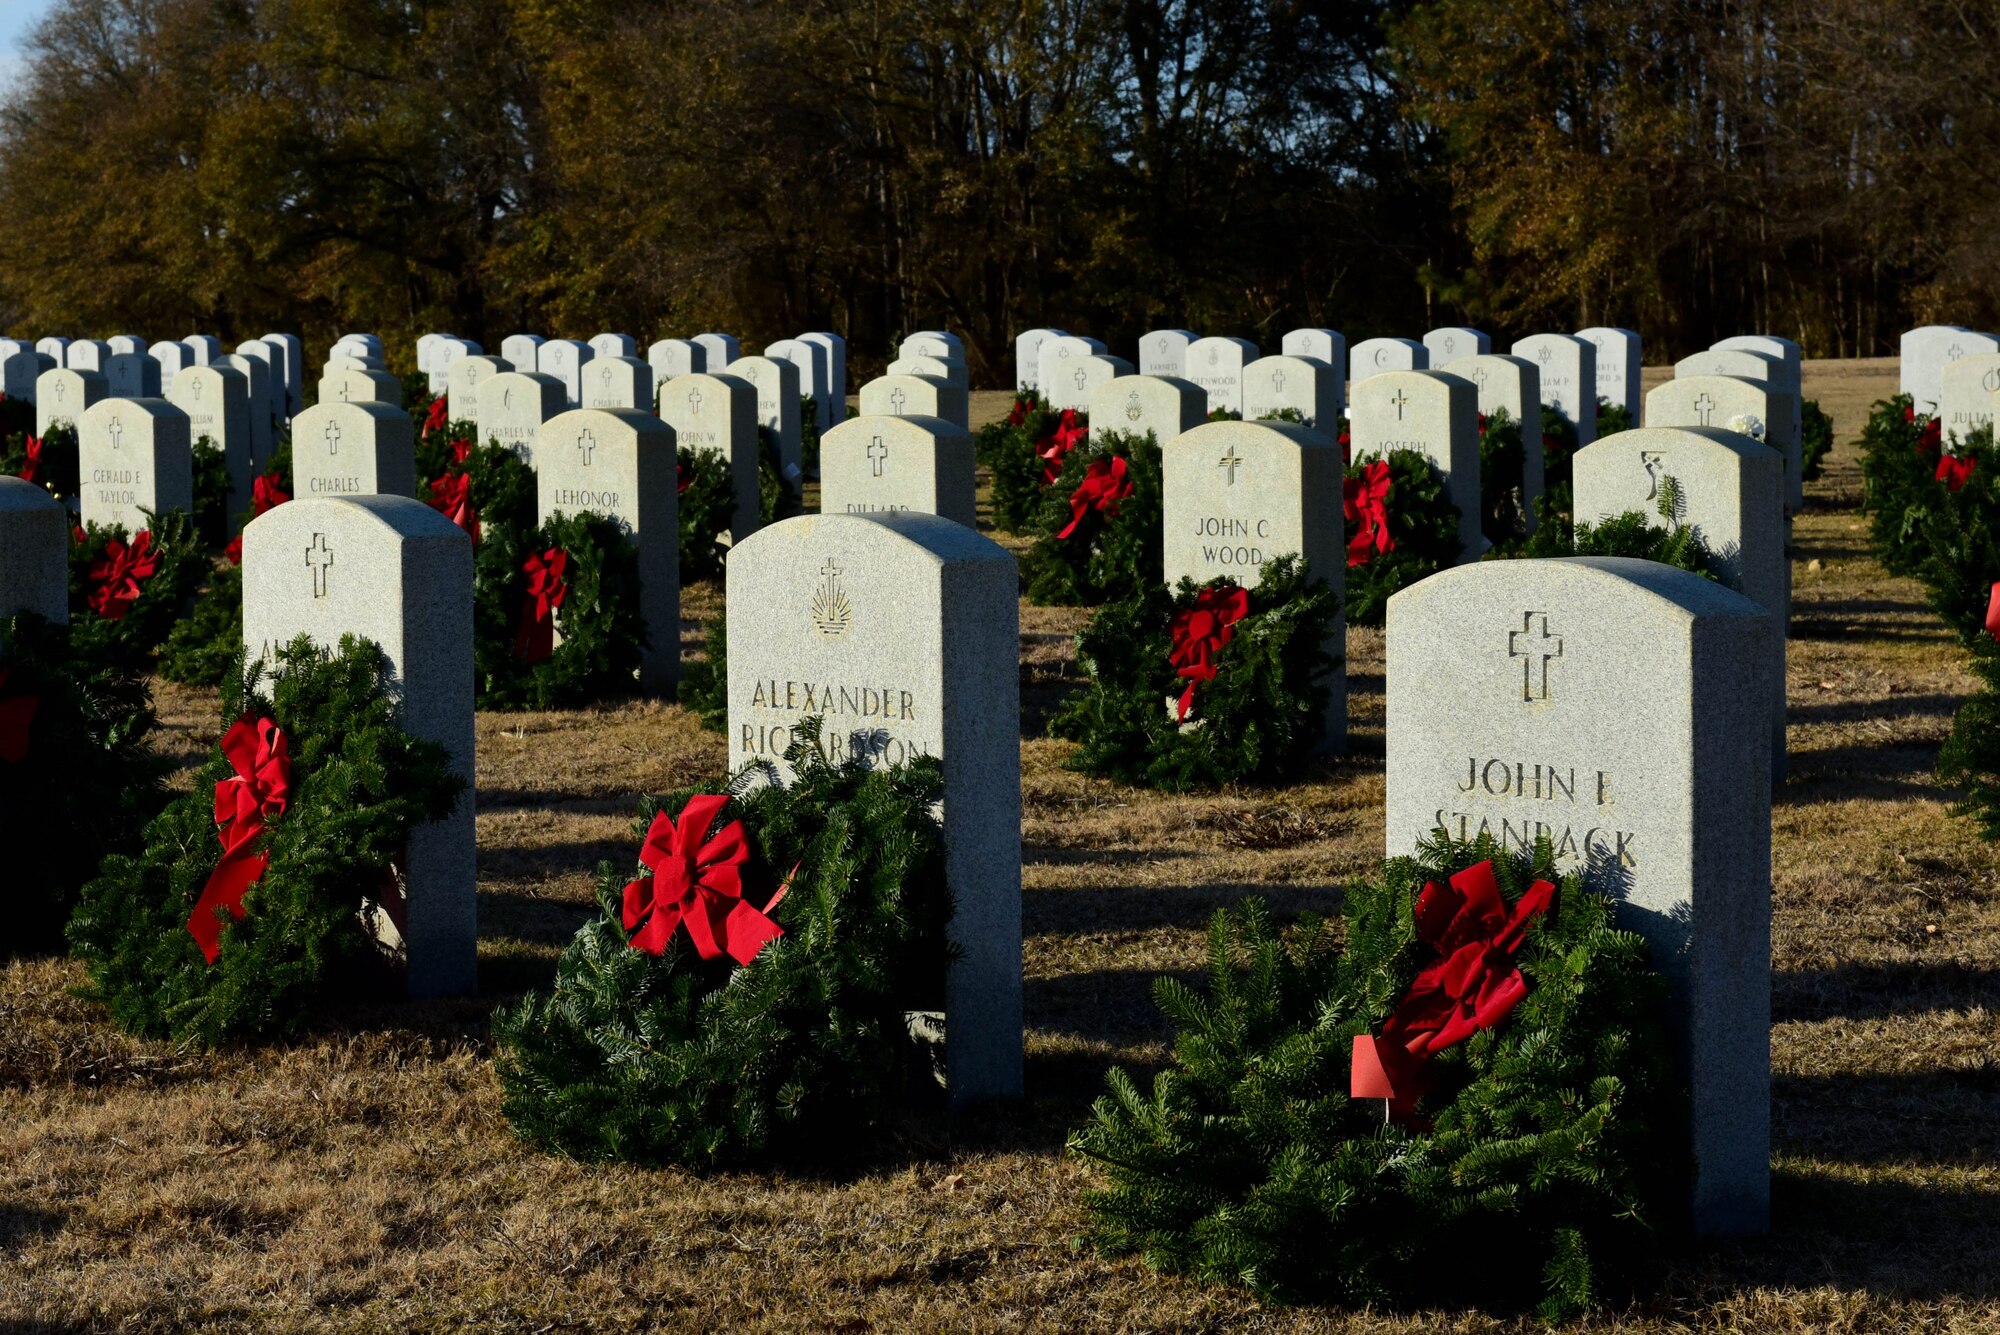 Wreaths are set out on the graves of fallen service members as part of the Wayne County Wreaths Across America wreath-laying ceremony Dec. 16, 2017, at the Eastern Carolina State Veterans Cemetery in Goldsboro, North Carolina.